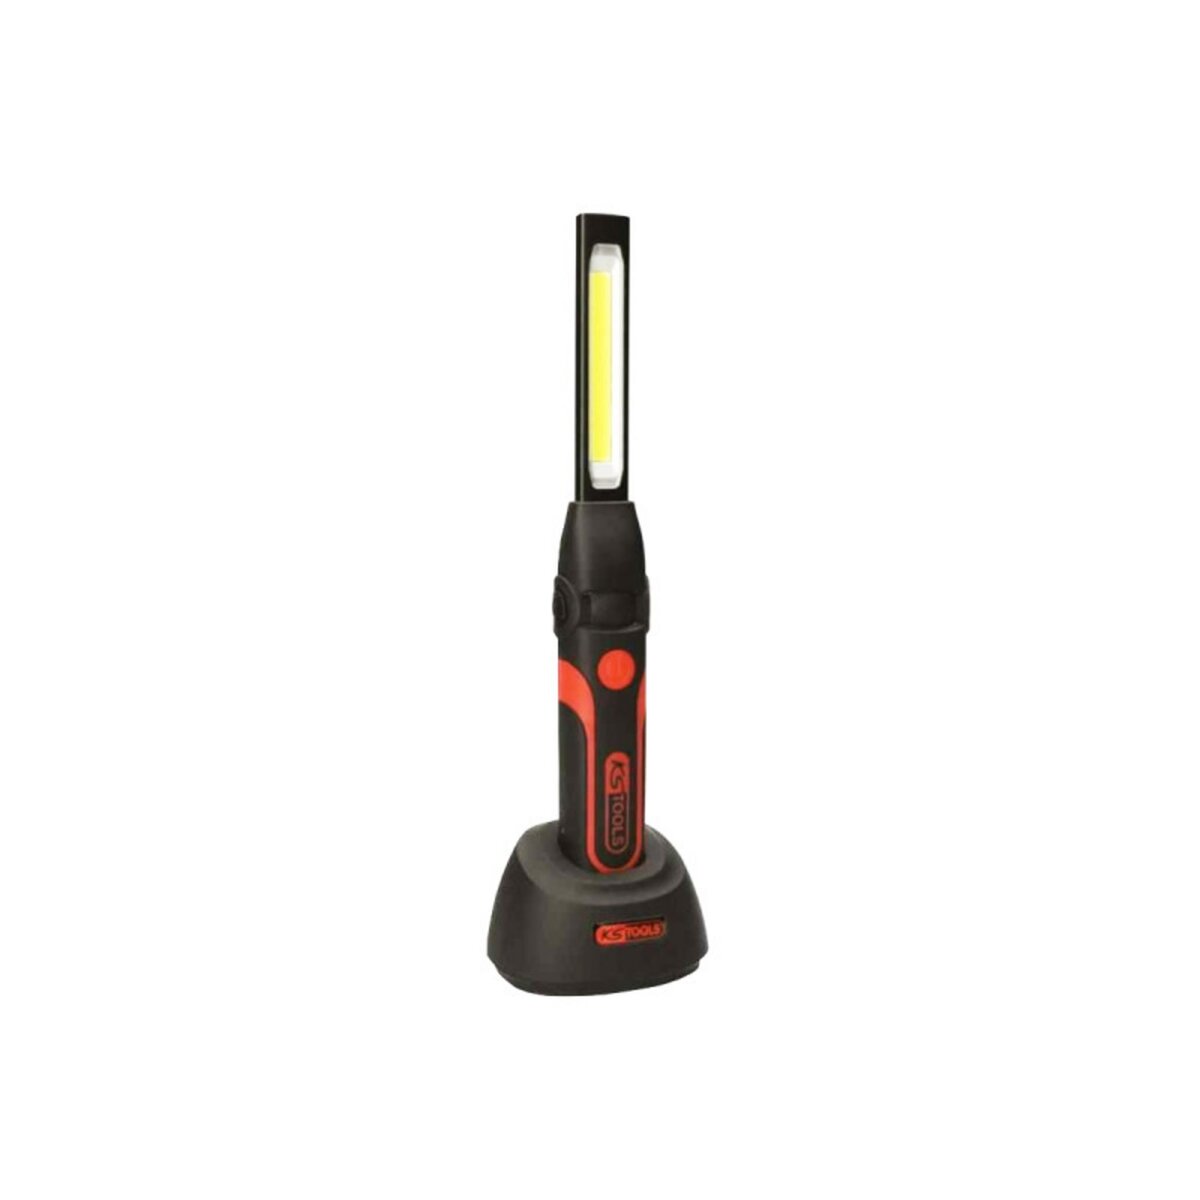 Lampe frontale, LED, rechargeable KS TOOLS